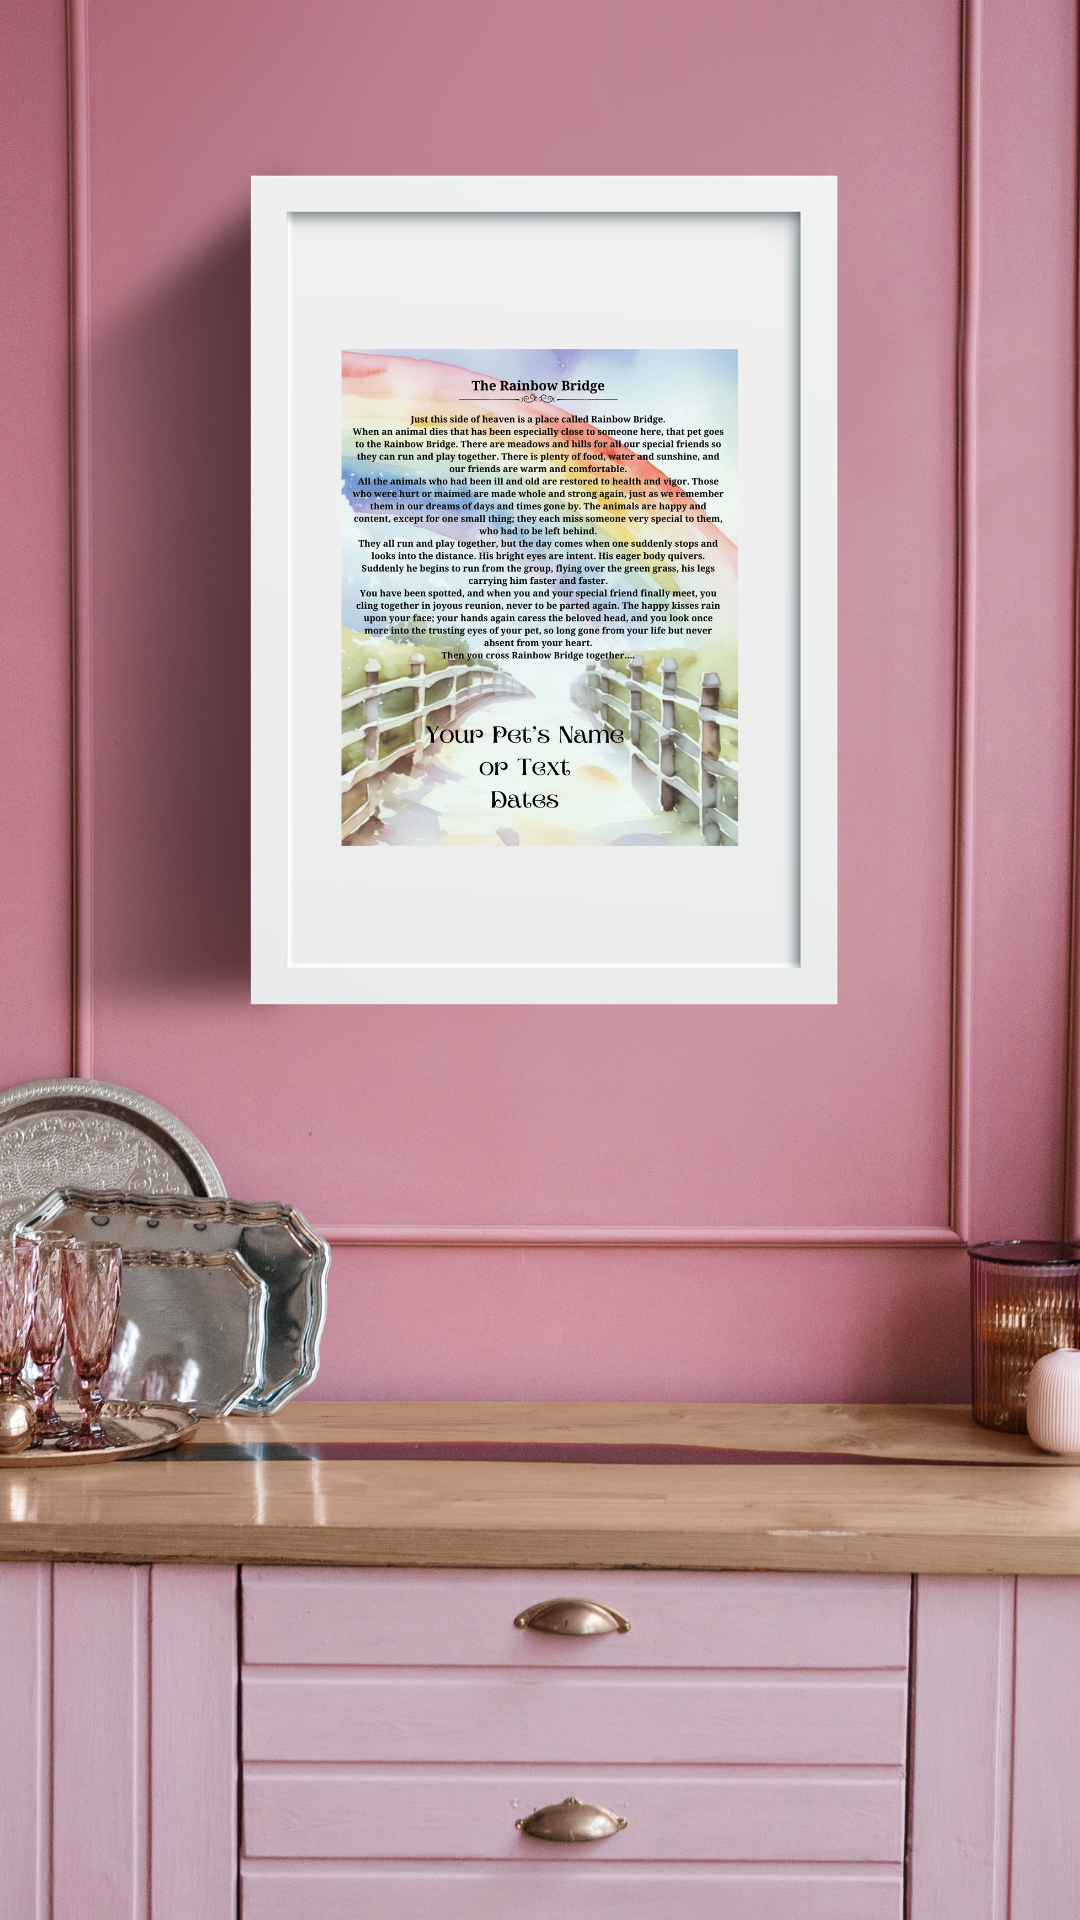 The Rainbow Bridge - Beautiful Art Print Customized with your Pet's Name(s), Text, Date - Ready to Frame 8" x 10" as a Beautiful Memorial